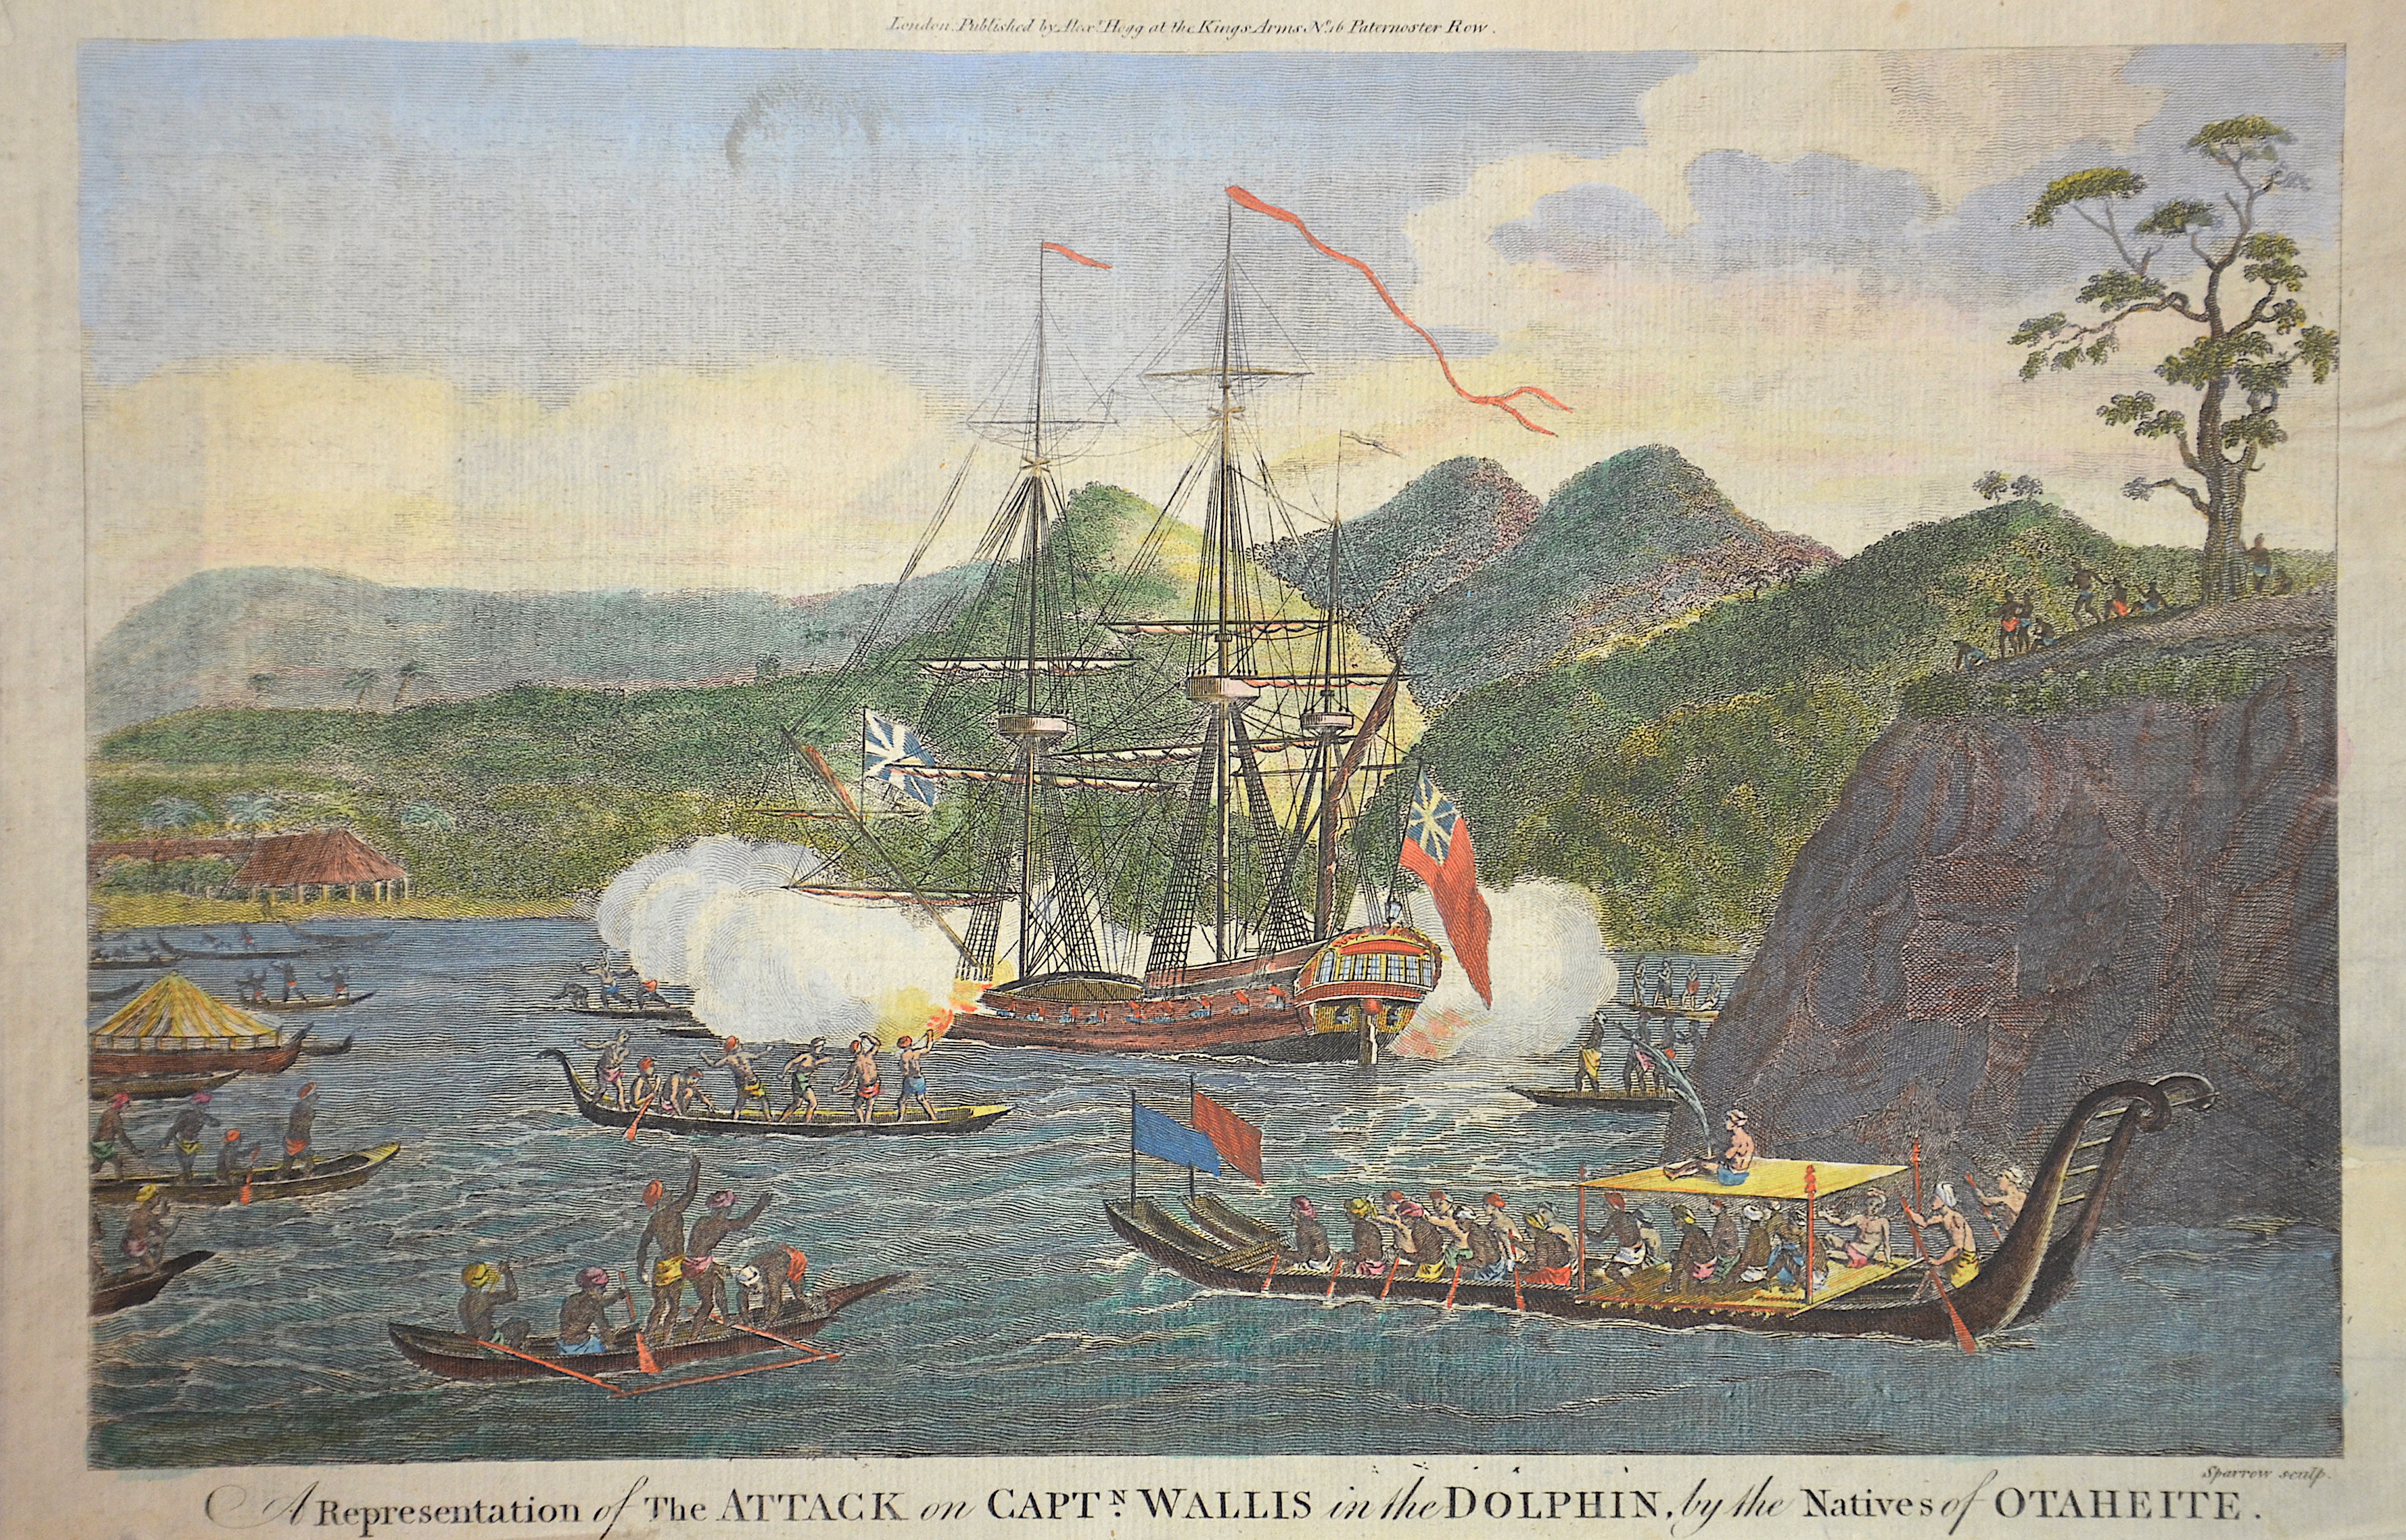 Hogg Alexander A Representation of The Attack on Captn. Wallis in the Dolphin, by the Natives of Otaheite.